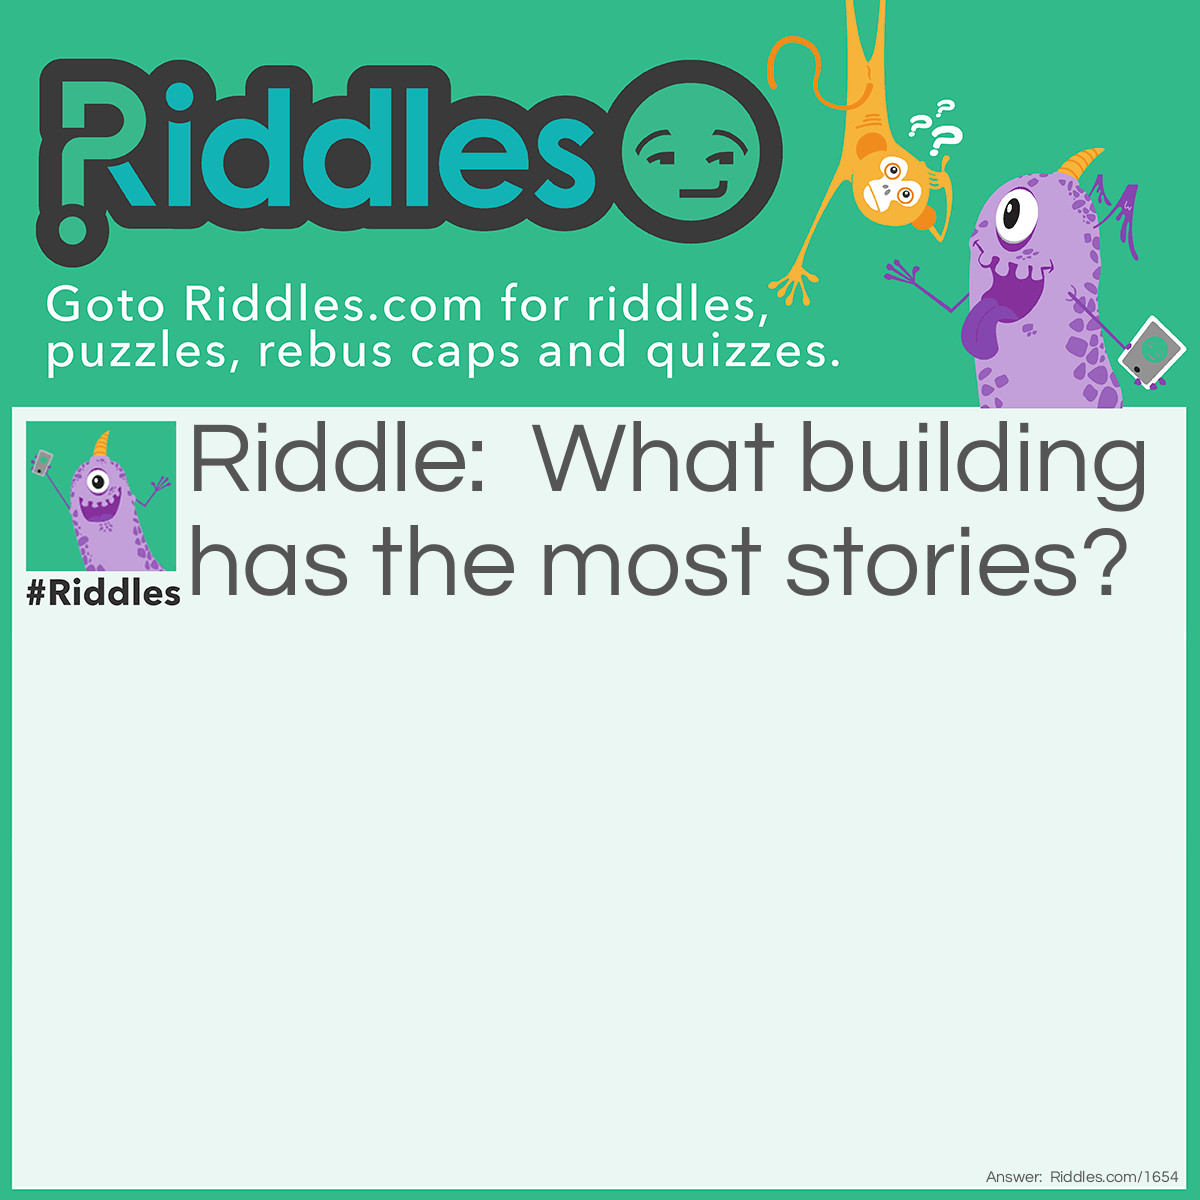 Riddle: What building has the most stories? Answer: The library.